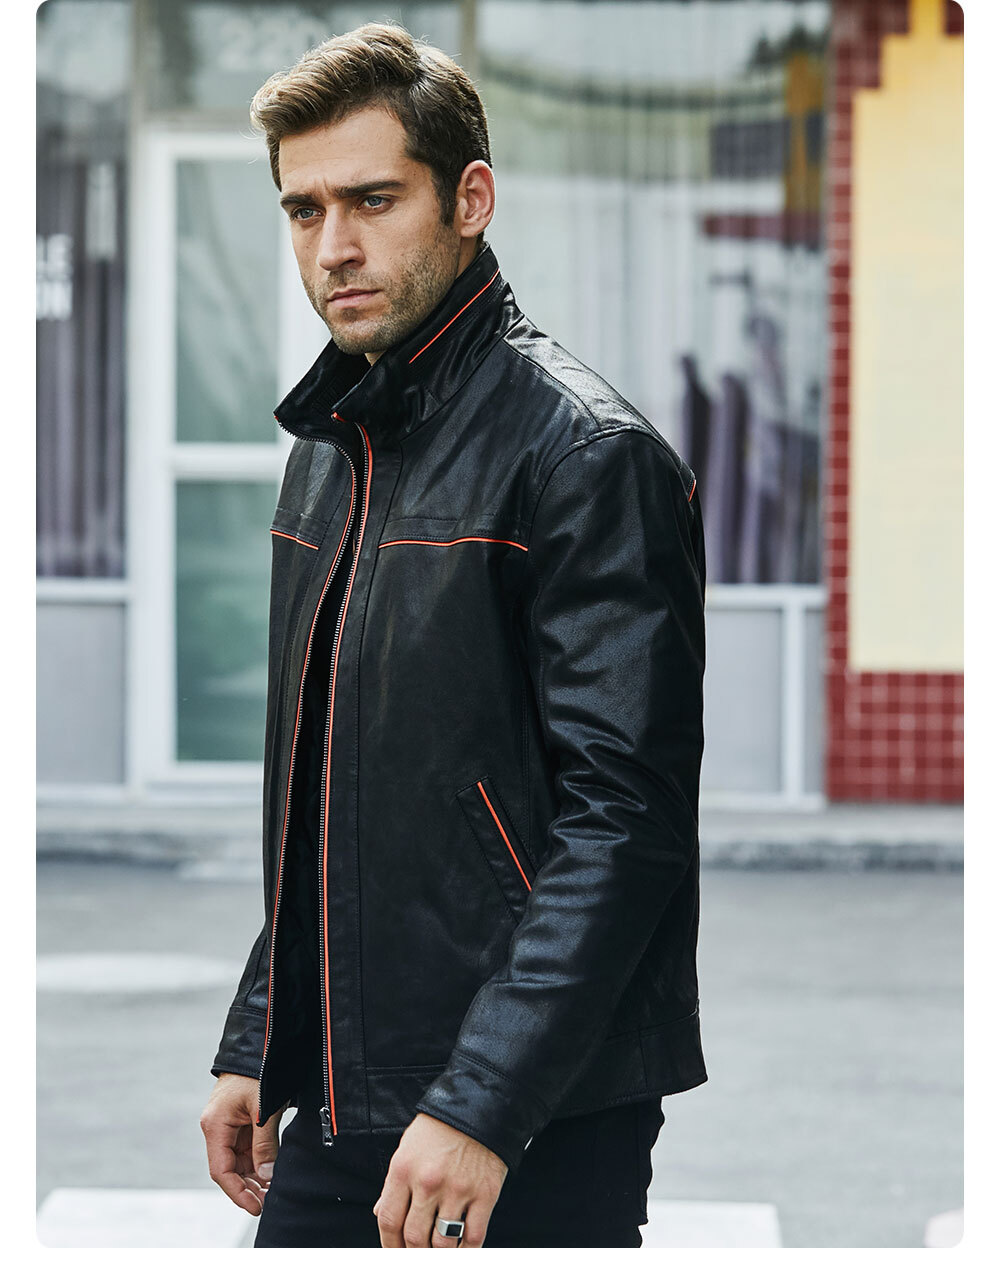 Men's Leather Stand Collar Jacket MXGX285 100% polyester flavor leather stand collar jacket| flavor leather genuine stand collar rib botton jacket